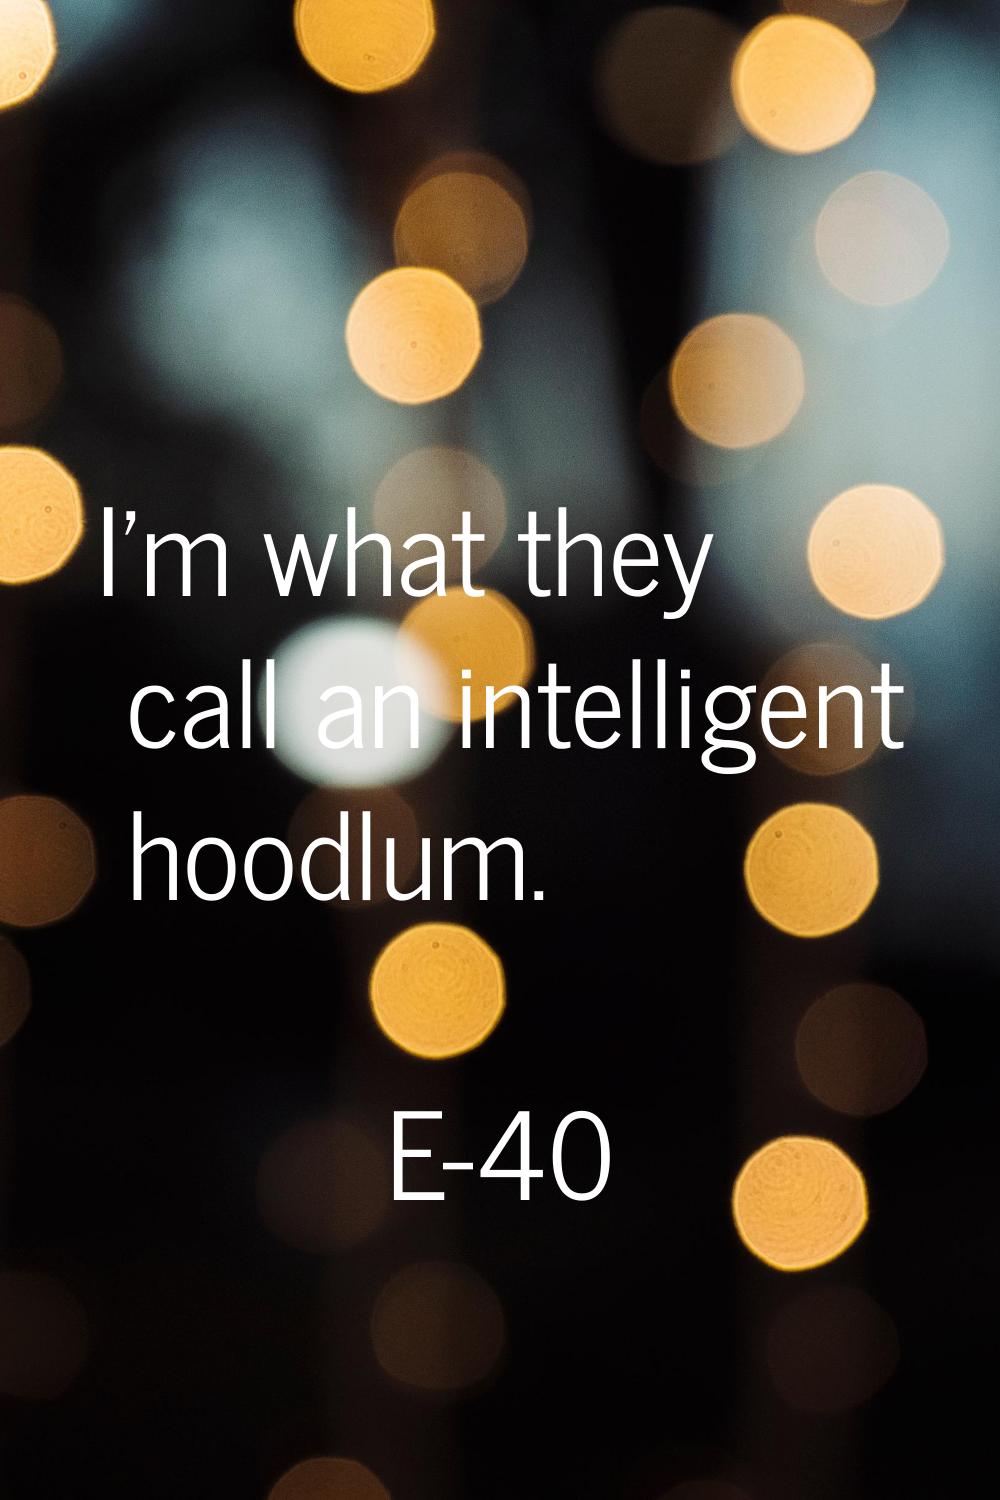 I'm what they call an intelligent hoodlum.